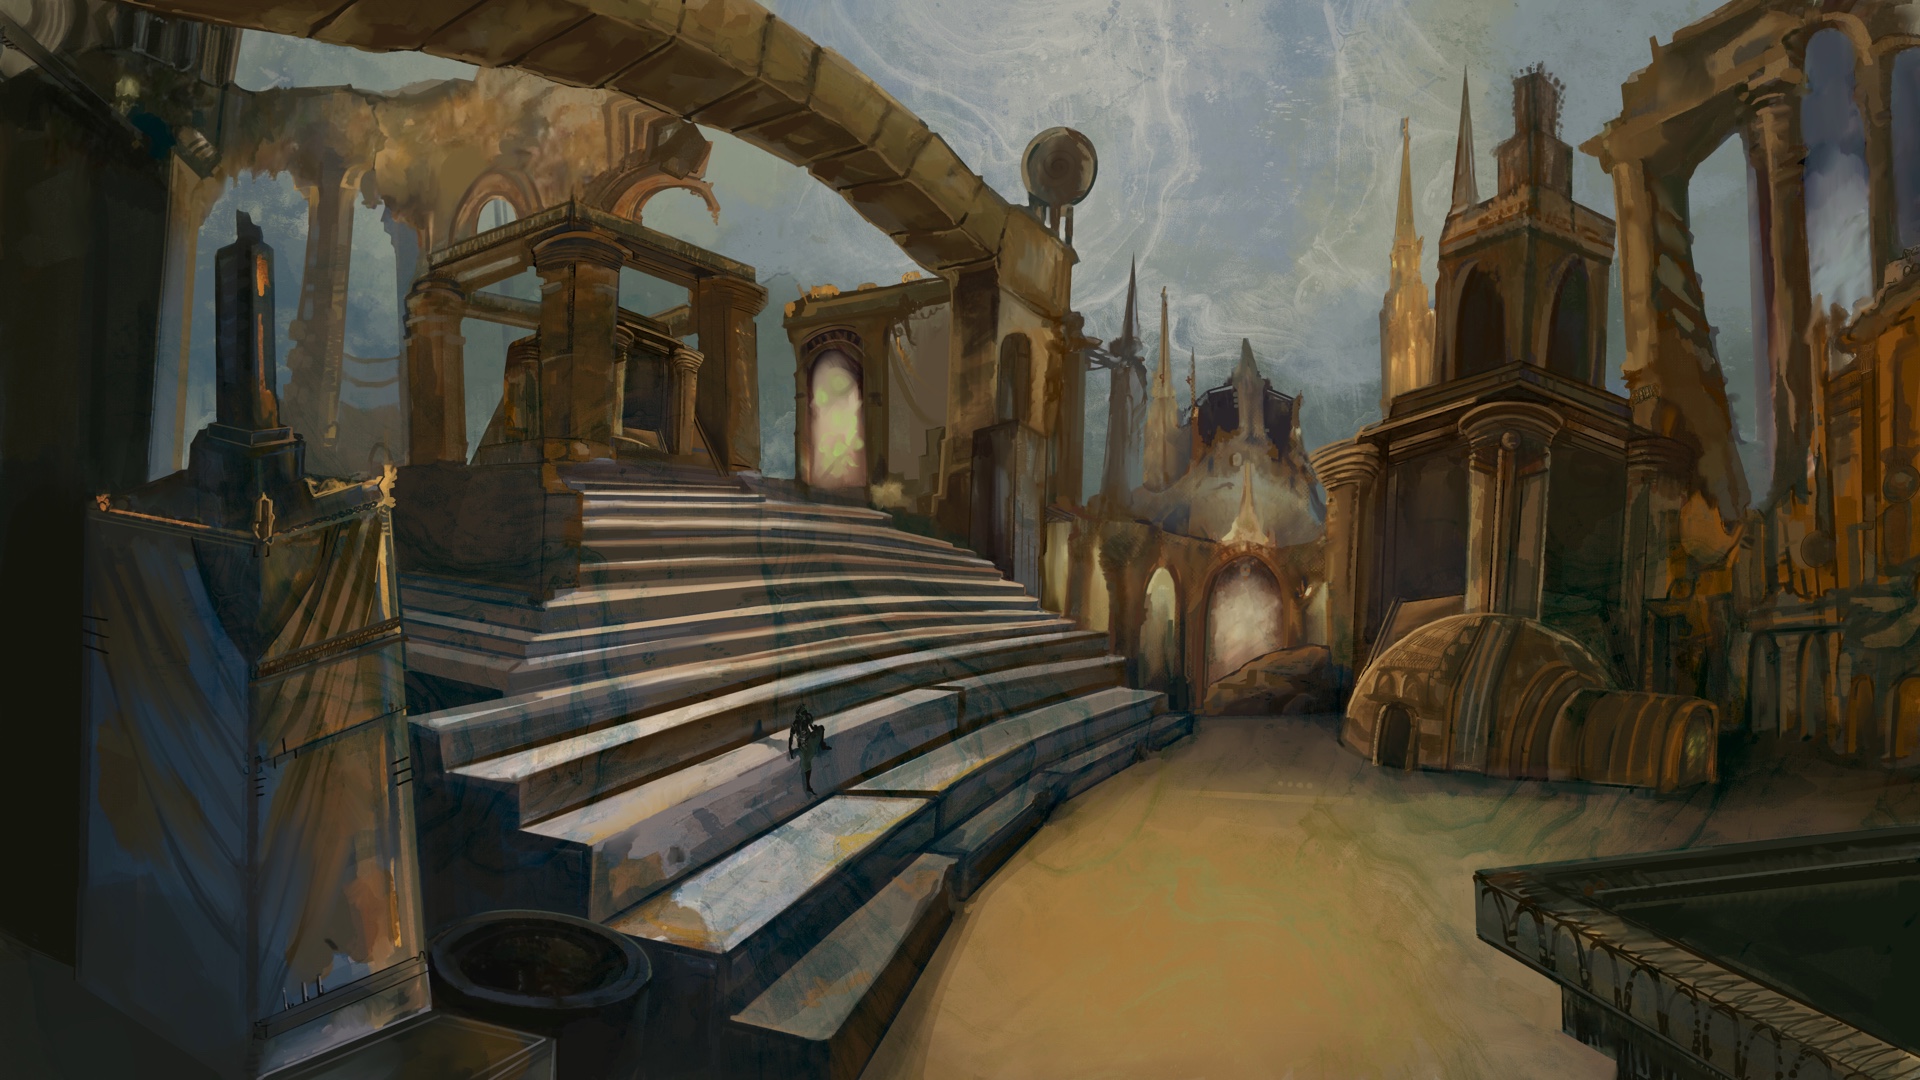 Key art showing a digital painting of an environment with steps, pillars and arches